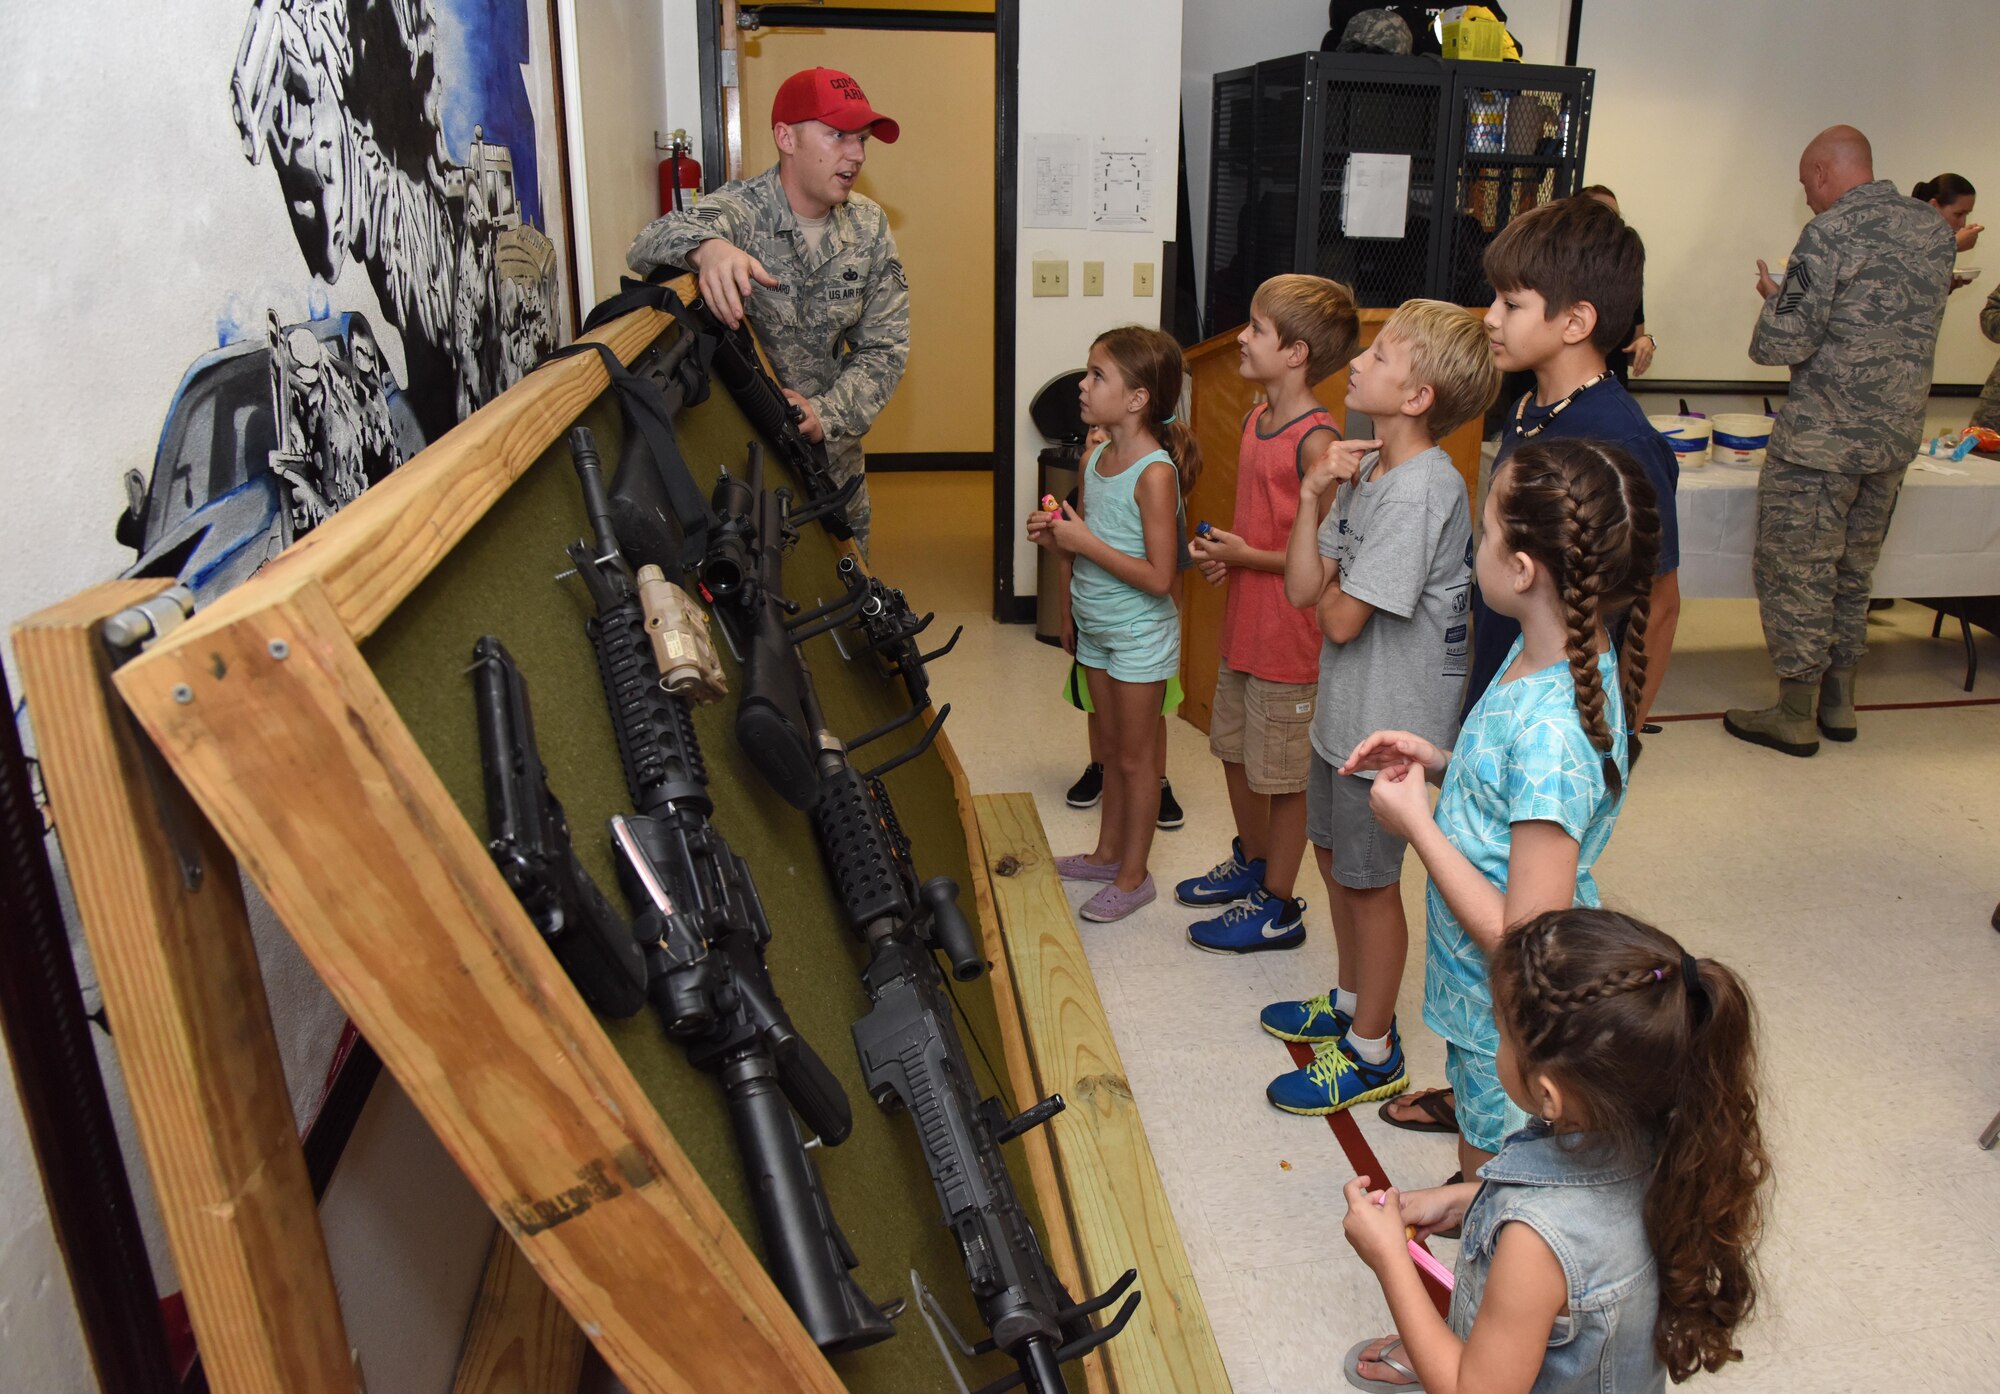 Staff Sgt. Jarrod Kinard, 81st Security Forces Squadron combat arms NCO in charge, briefs family members about weapons safety during a family ice cream social at the 81st SFS building July 27, 2017, on Keesler Air Force Base, Miss. The event, hosted by the 81st SFS Defenders Council and Key Spouses, also consisted of a military working dog demonstration and ice cream. (U.S. Air Force photo by Kemberly Groue)